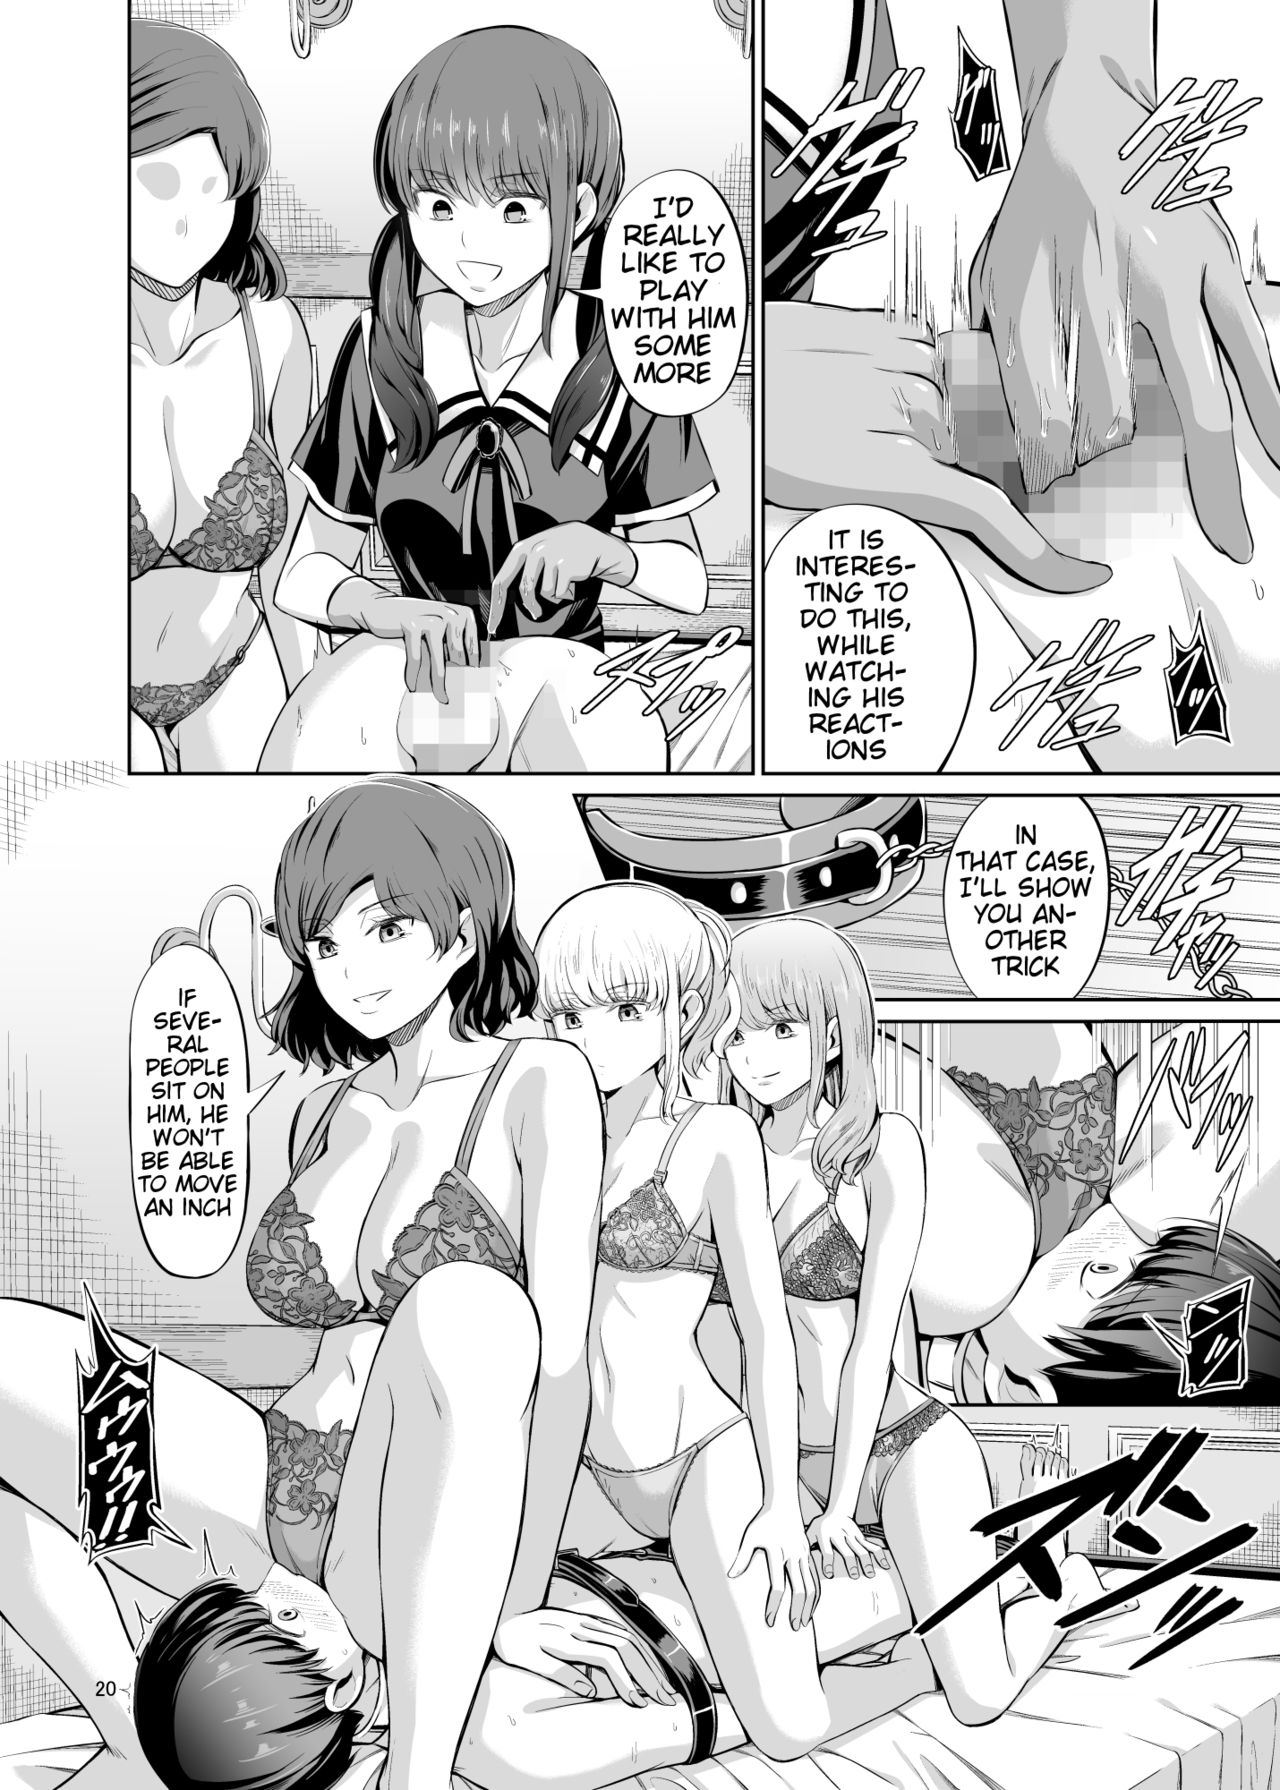 [Yamahata Rian] Tensuushugi no Kuni Kouhen | A Country Based on Point System Sequel [English] [Esoteric_Autist, klow82] page 22 full